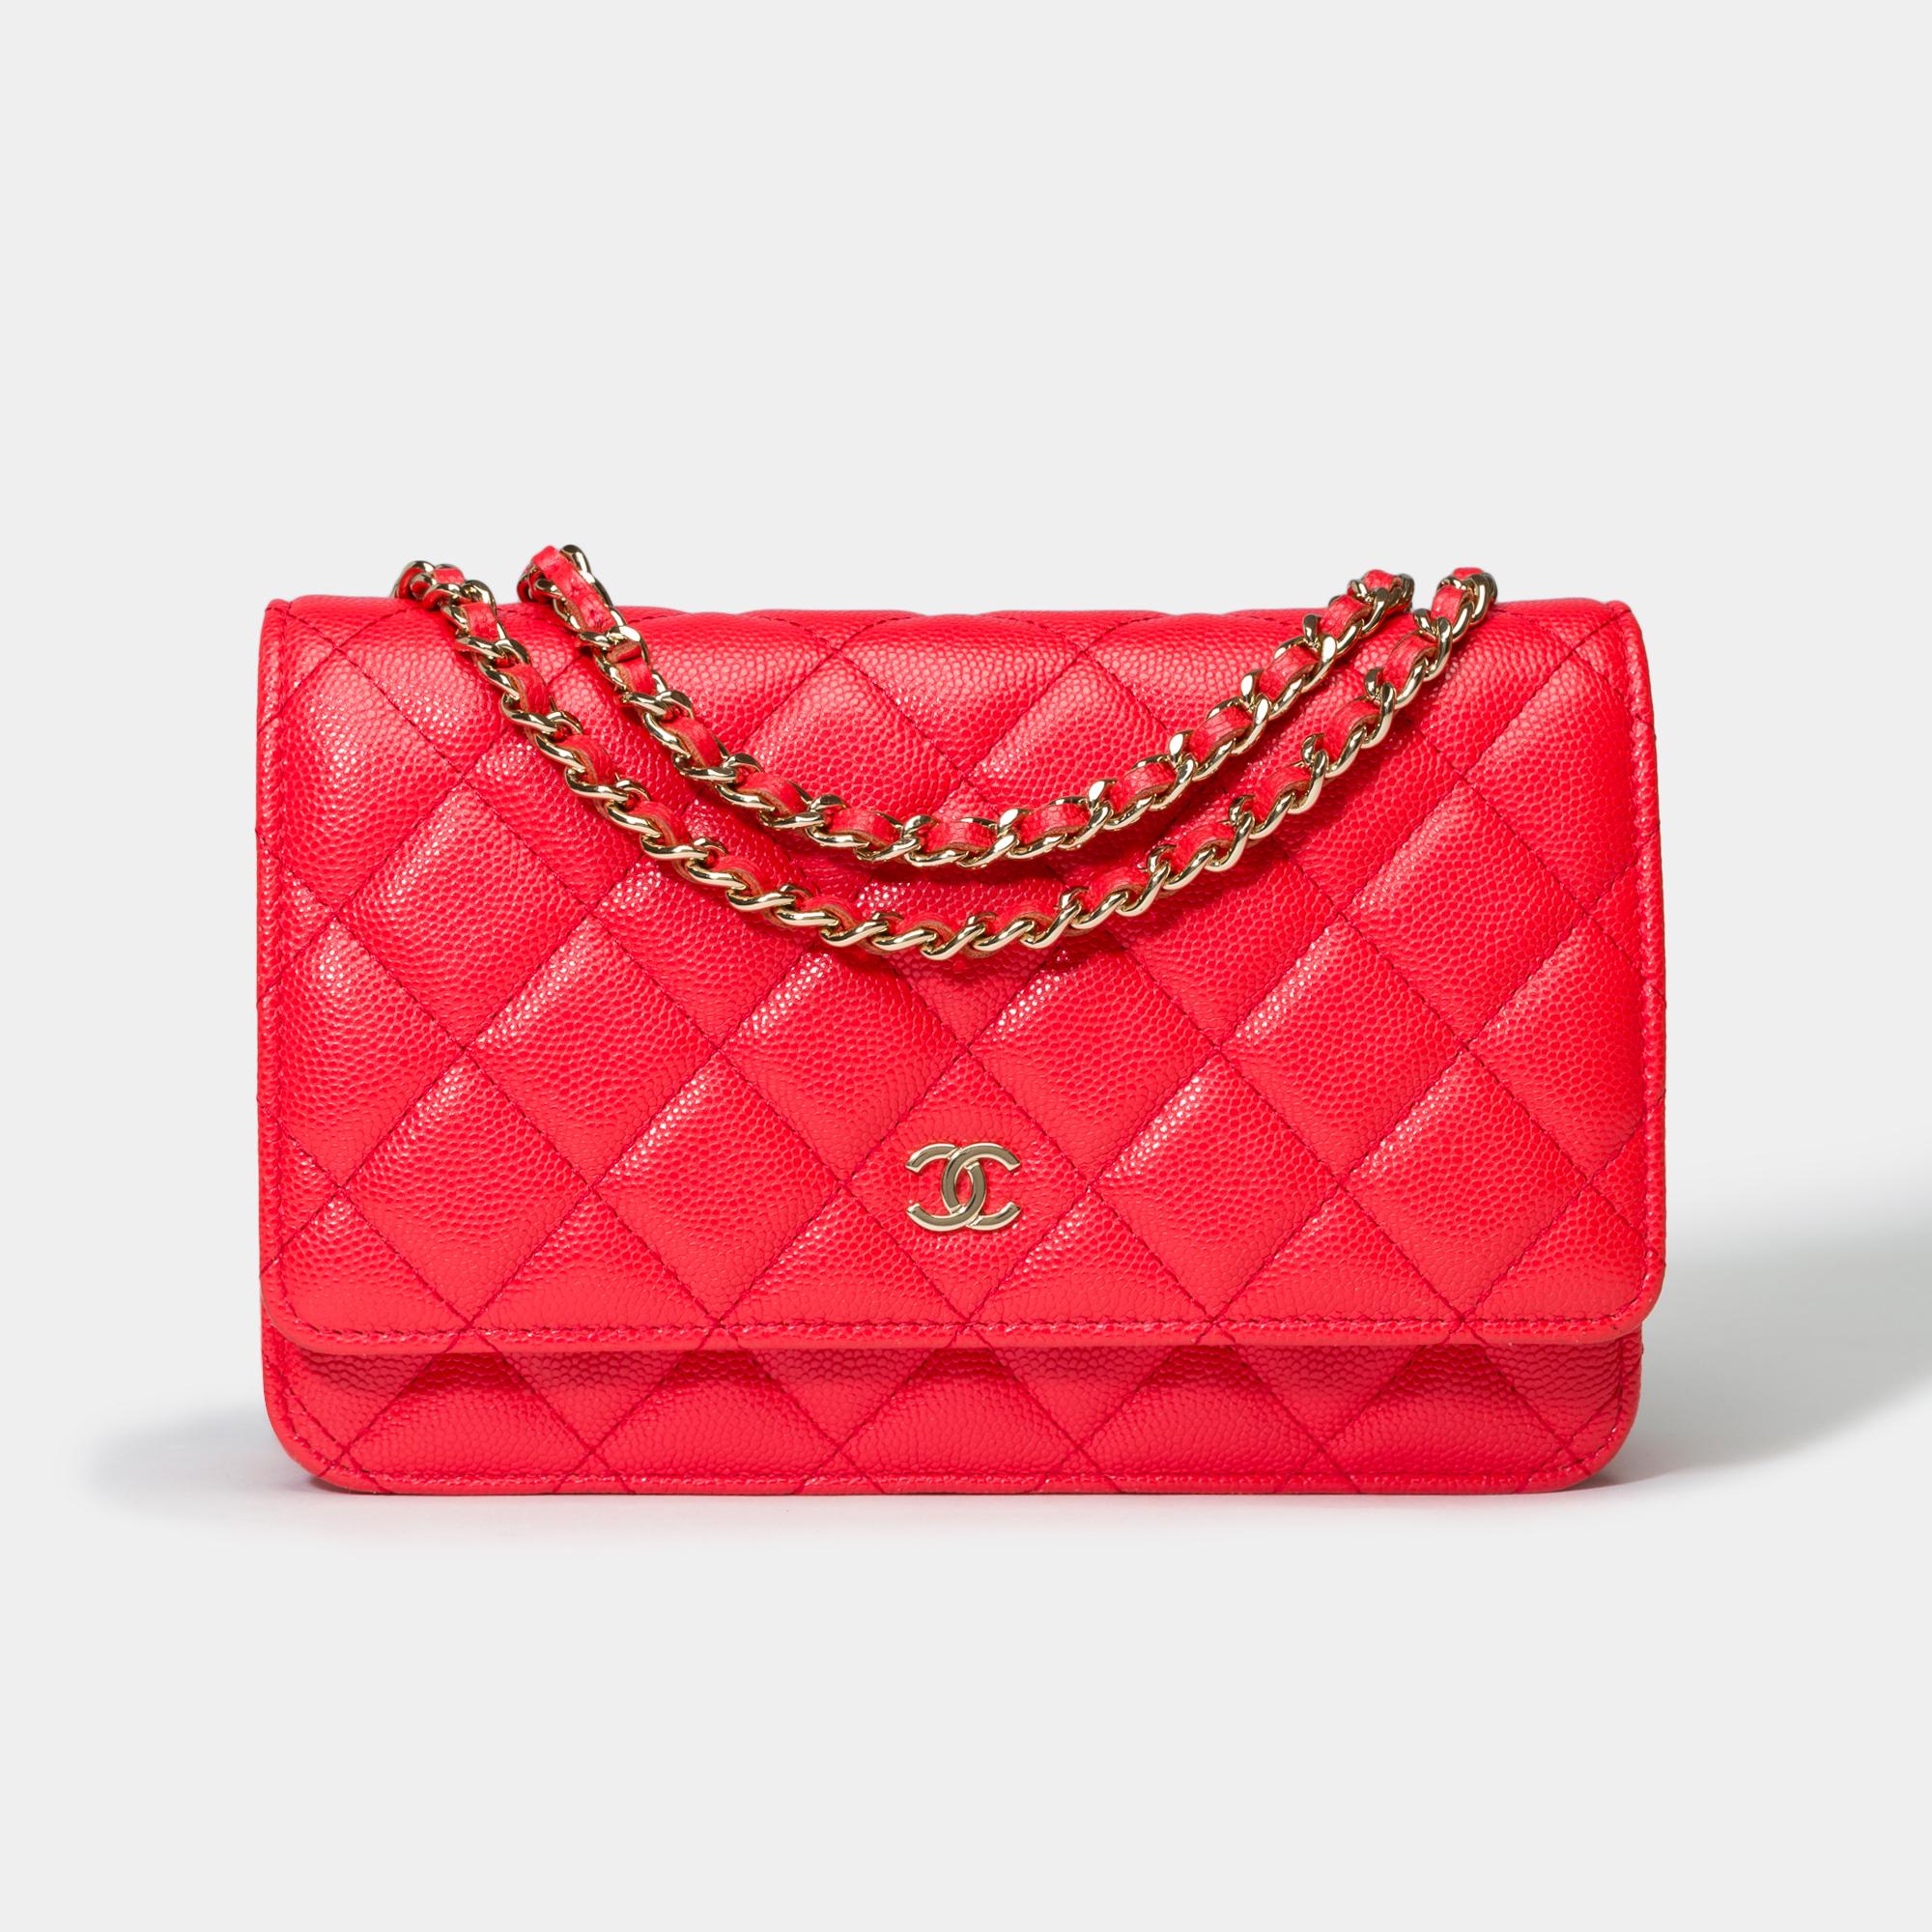 Stunning​ ​Chanel​ ​Wallet​ ​On​ ​Chain​ ​Bag​ ​(WOC)​ ​in​ ​red​ ​quilted​ ​caviar​ ​leather,​ ​gold​ ​metal​ ​trim,​ ​a​ ​gold​ ​metal​ ​chain​ ​handle​ ​interlaced​ ​with​ ​red​ ​leather​ ​allowing​ ​a​ ​shoulder​ ​or​ ​crossbody​